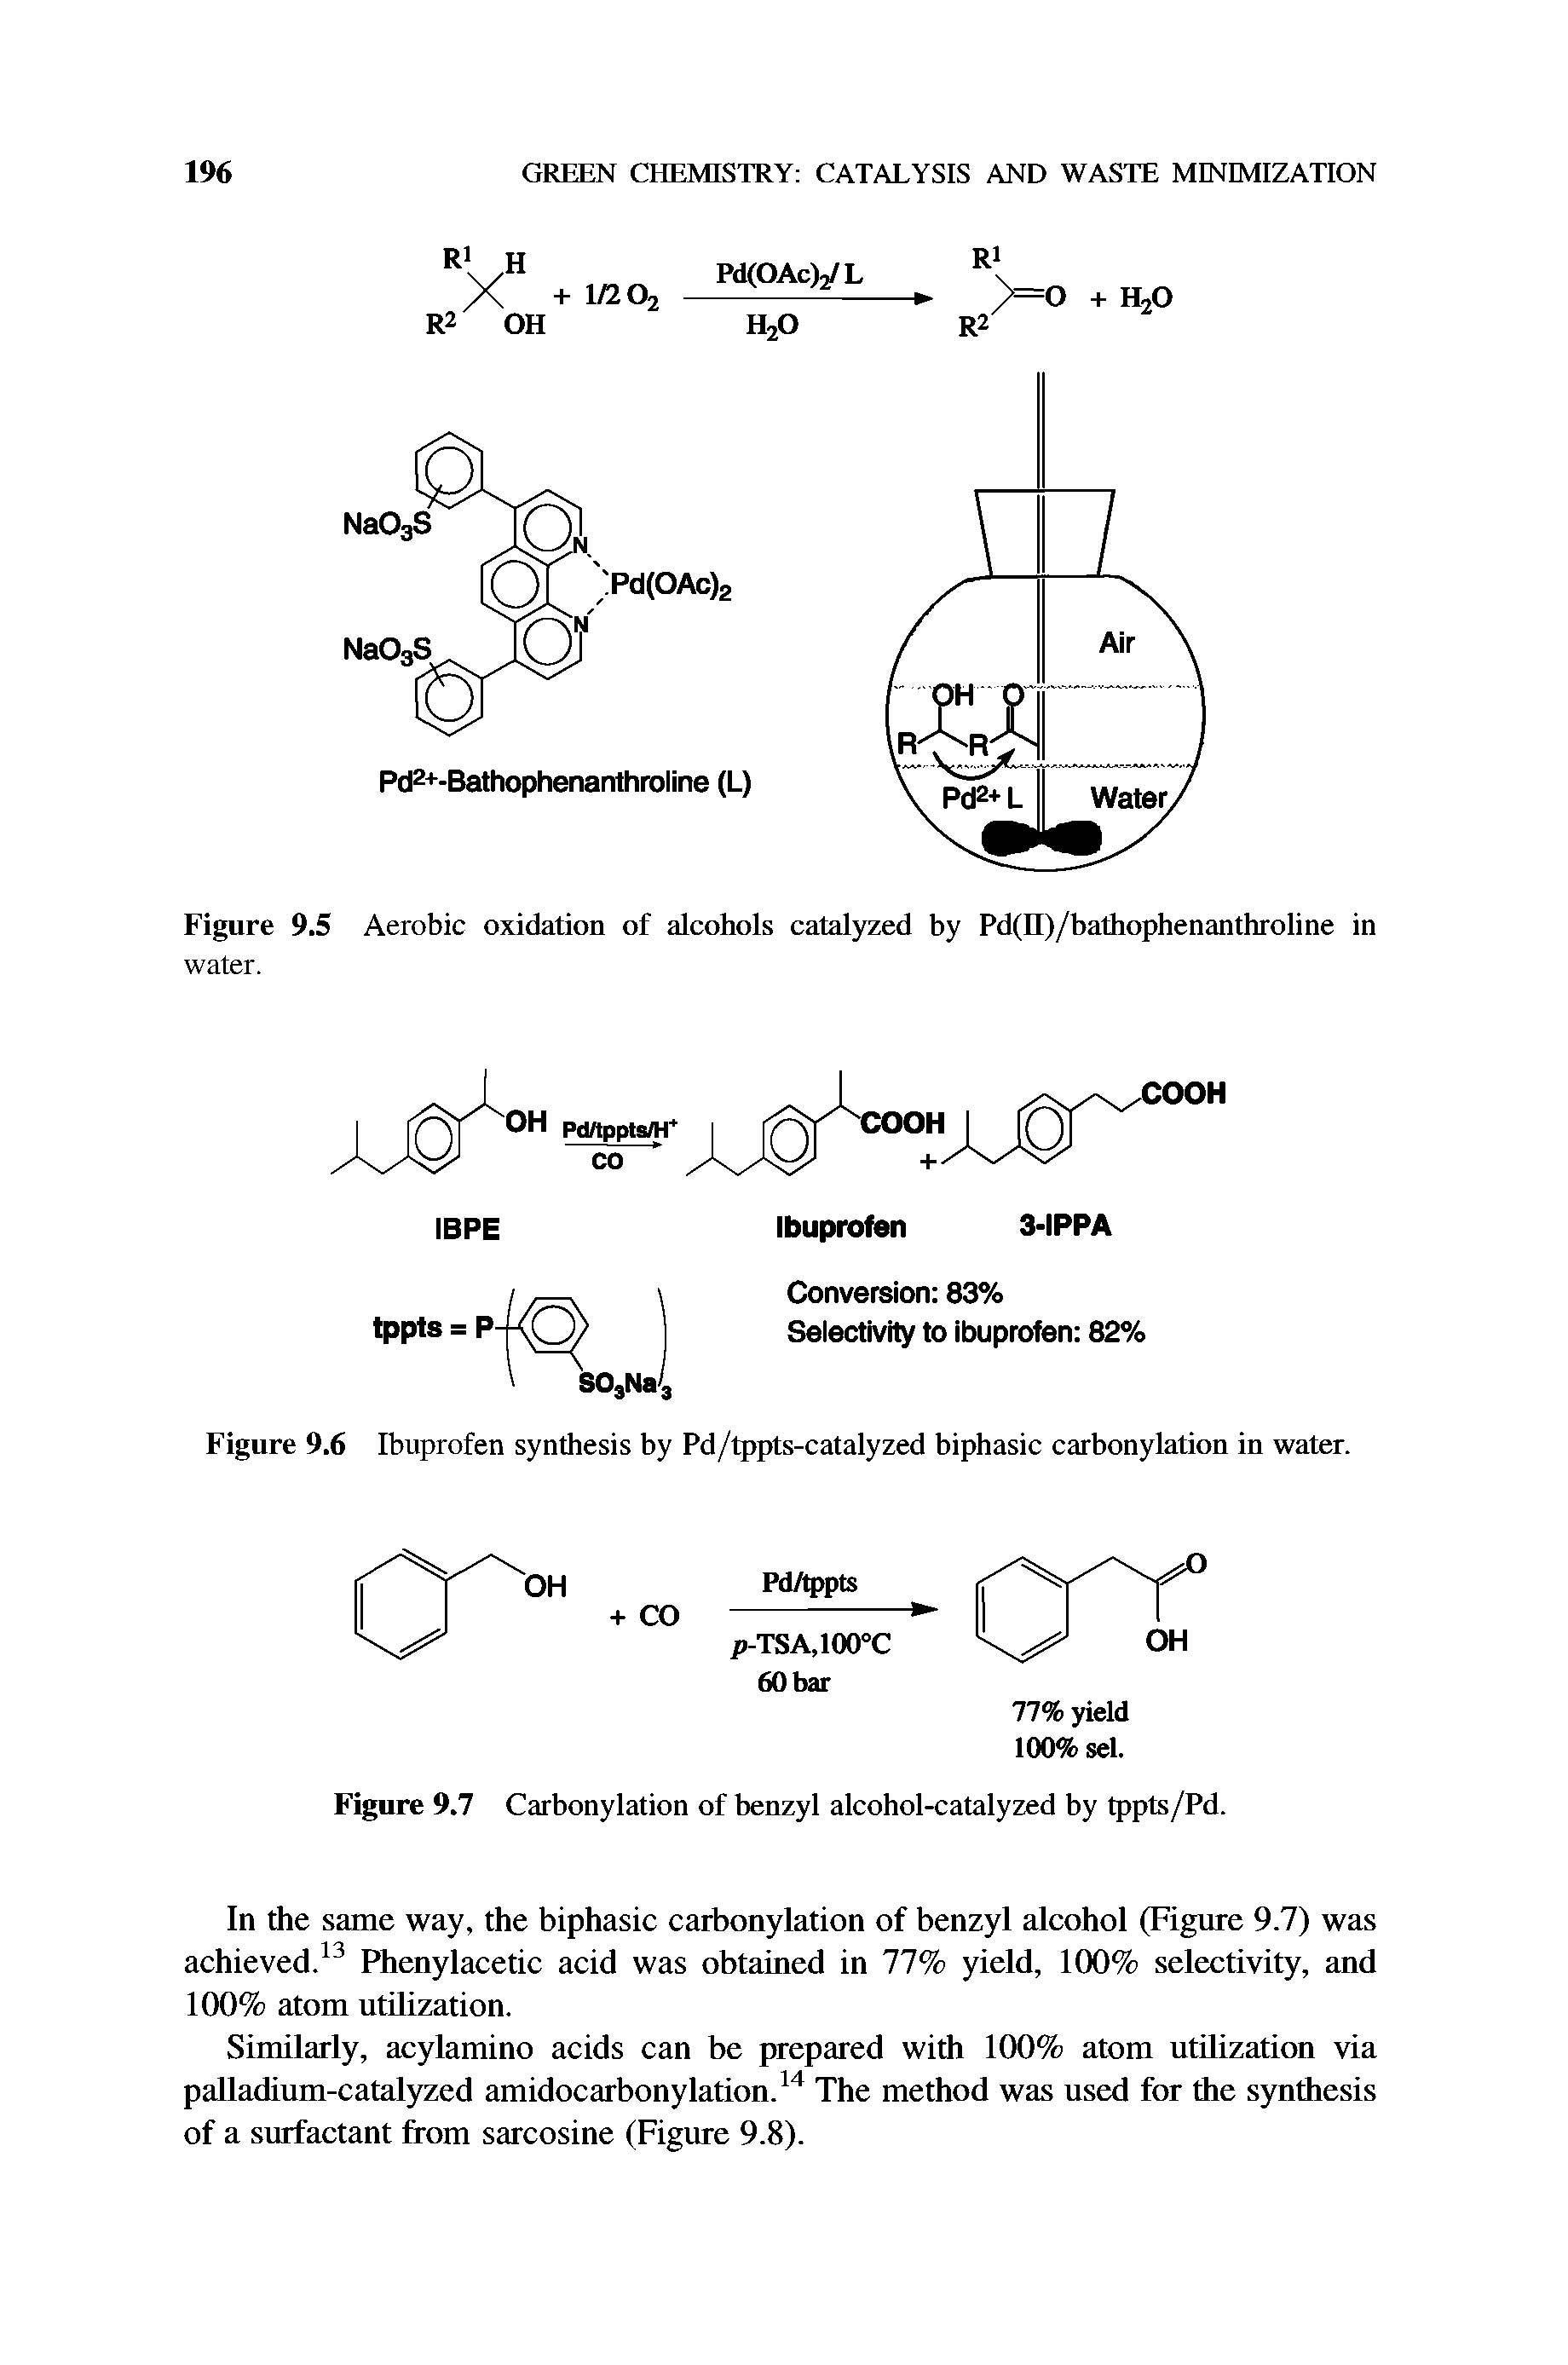 Figure 9.7 Carbonylation of benzyl alcohol-catalyzed by tppts/Pd.